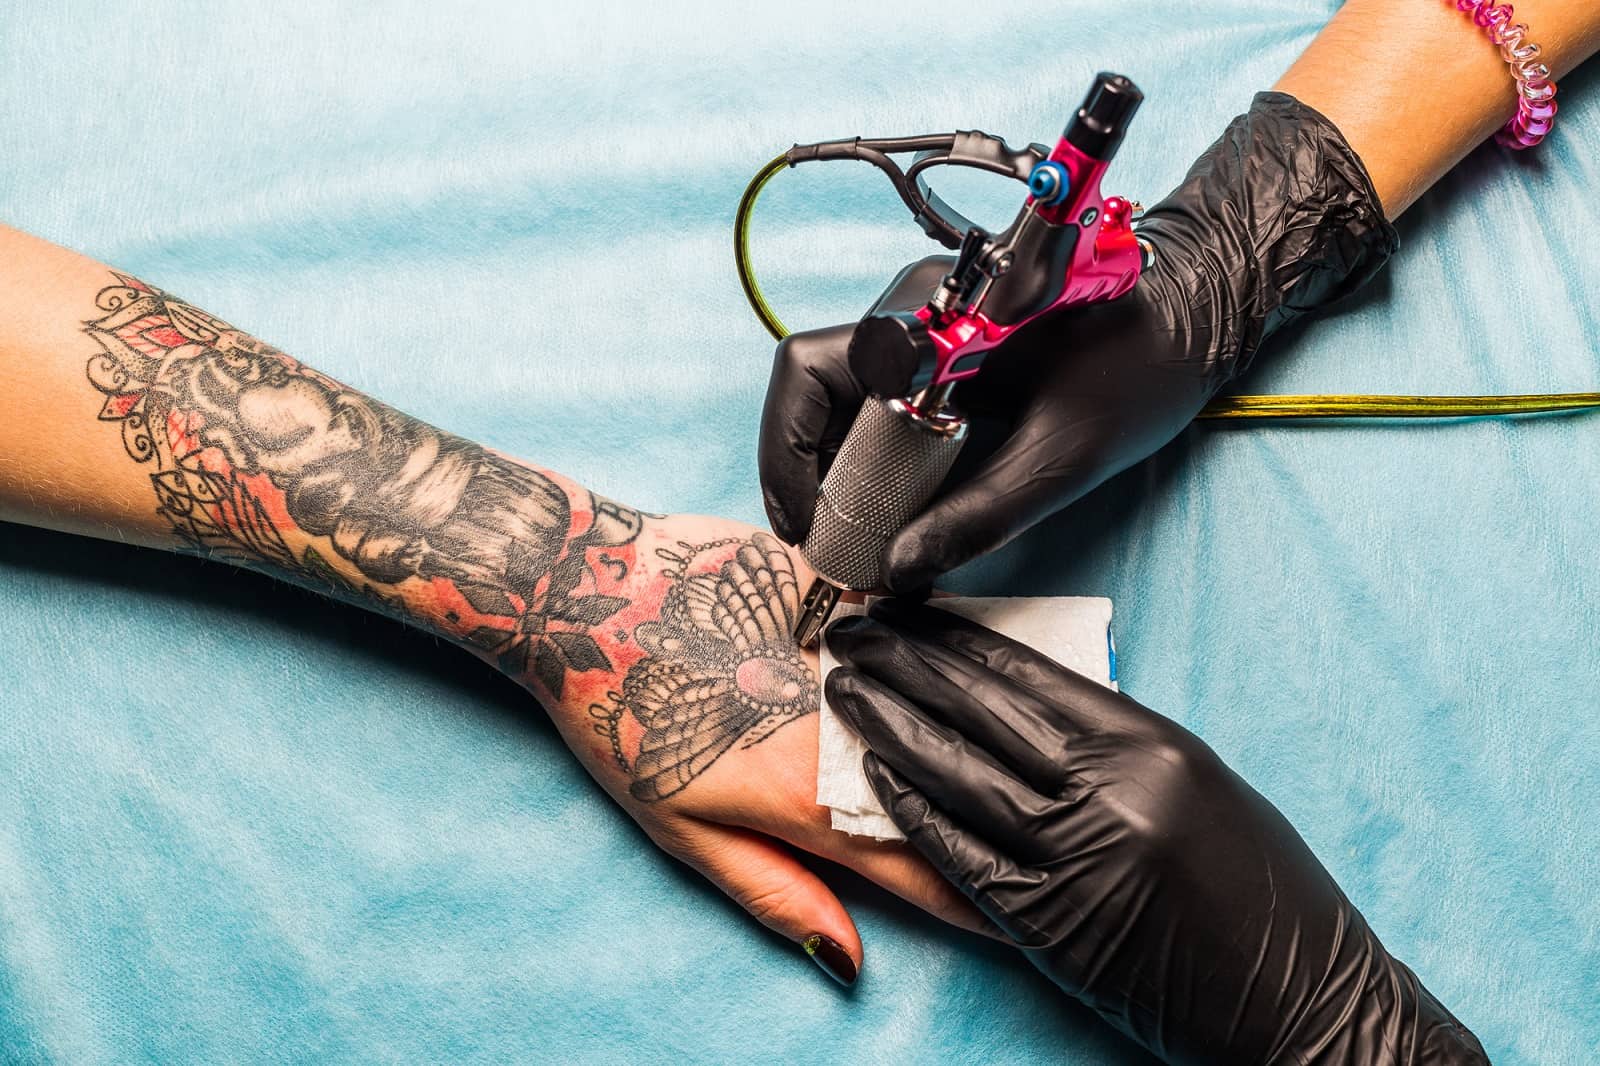 Iowa City artists take different paths to becoming tattoo artists  The  Daily Iowan